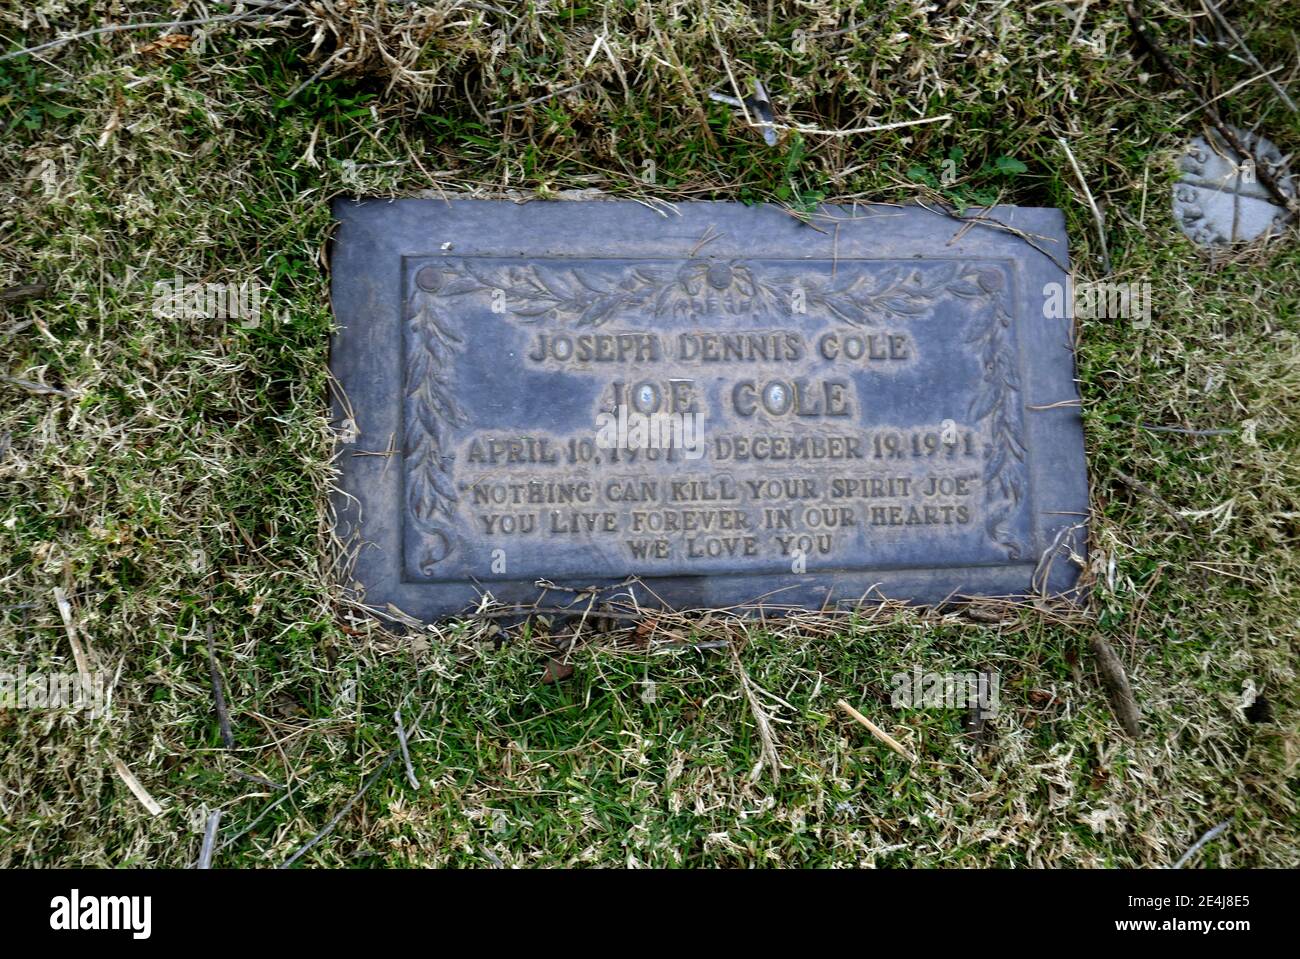 Los Angeles, California, USA 21st January 2021 A general view of atmosphere of actor Joseph Dennis Cole's Grave at Forest Lawn Memorial Park Hollywood Hills on January 21, 2021 in Los Angeles, California, USA. Photo by Barry King/Alamy Stock Photo Stock Photo